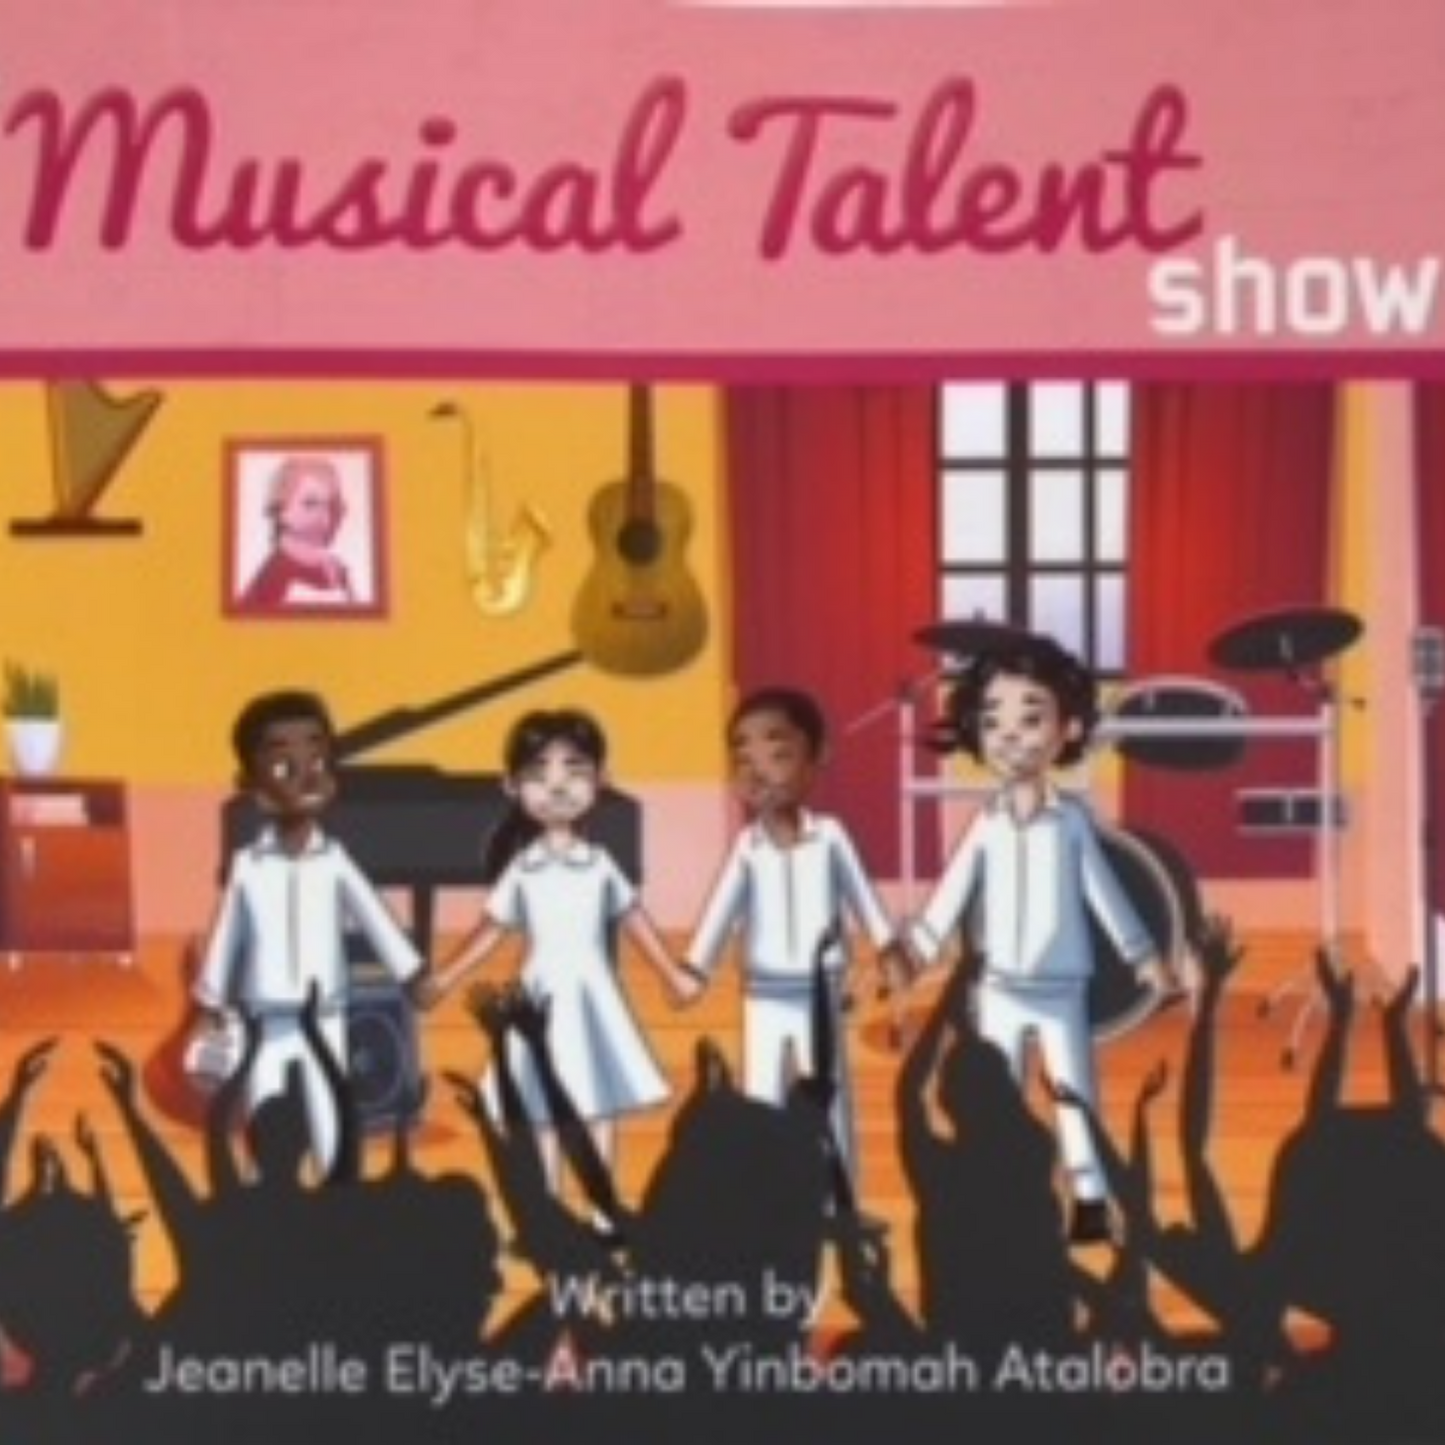 The Musical Talent show